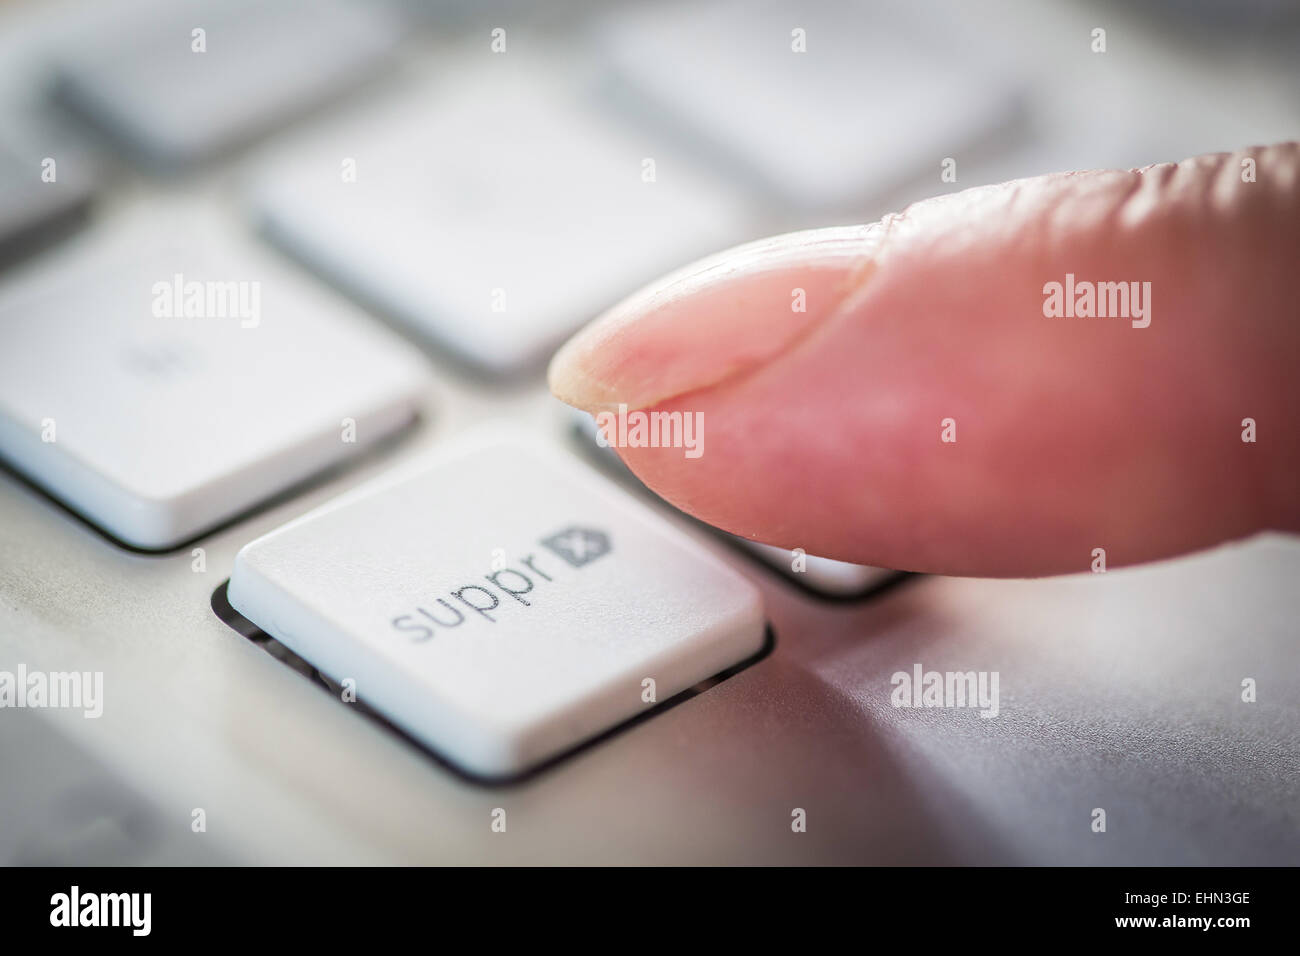 Woman pressing a button on a computer keyboard. Stock Photo